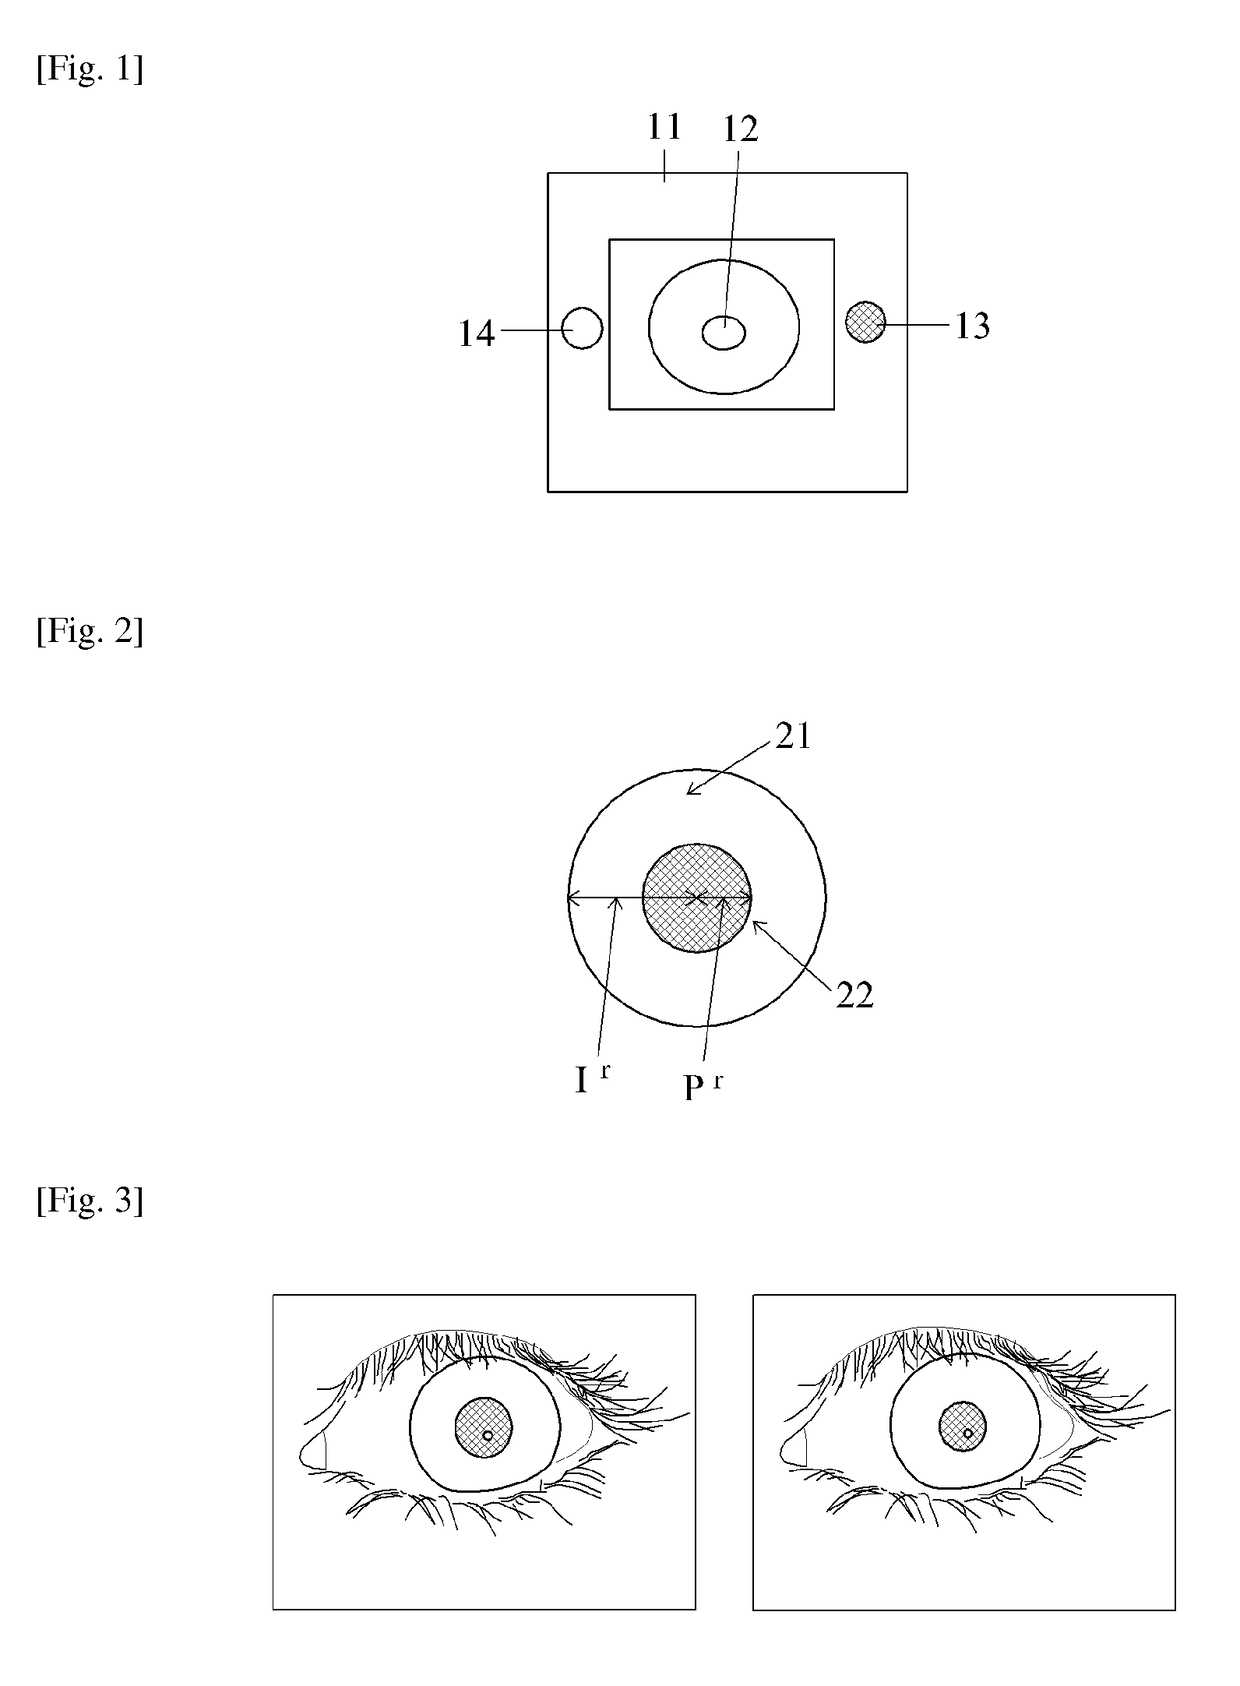 Method and apparatus for identifying living eye